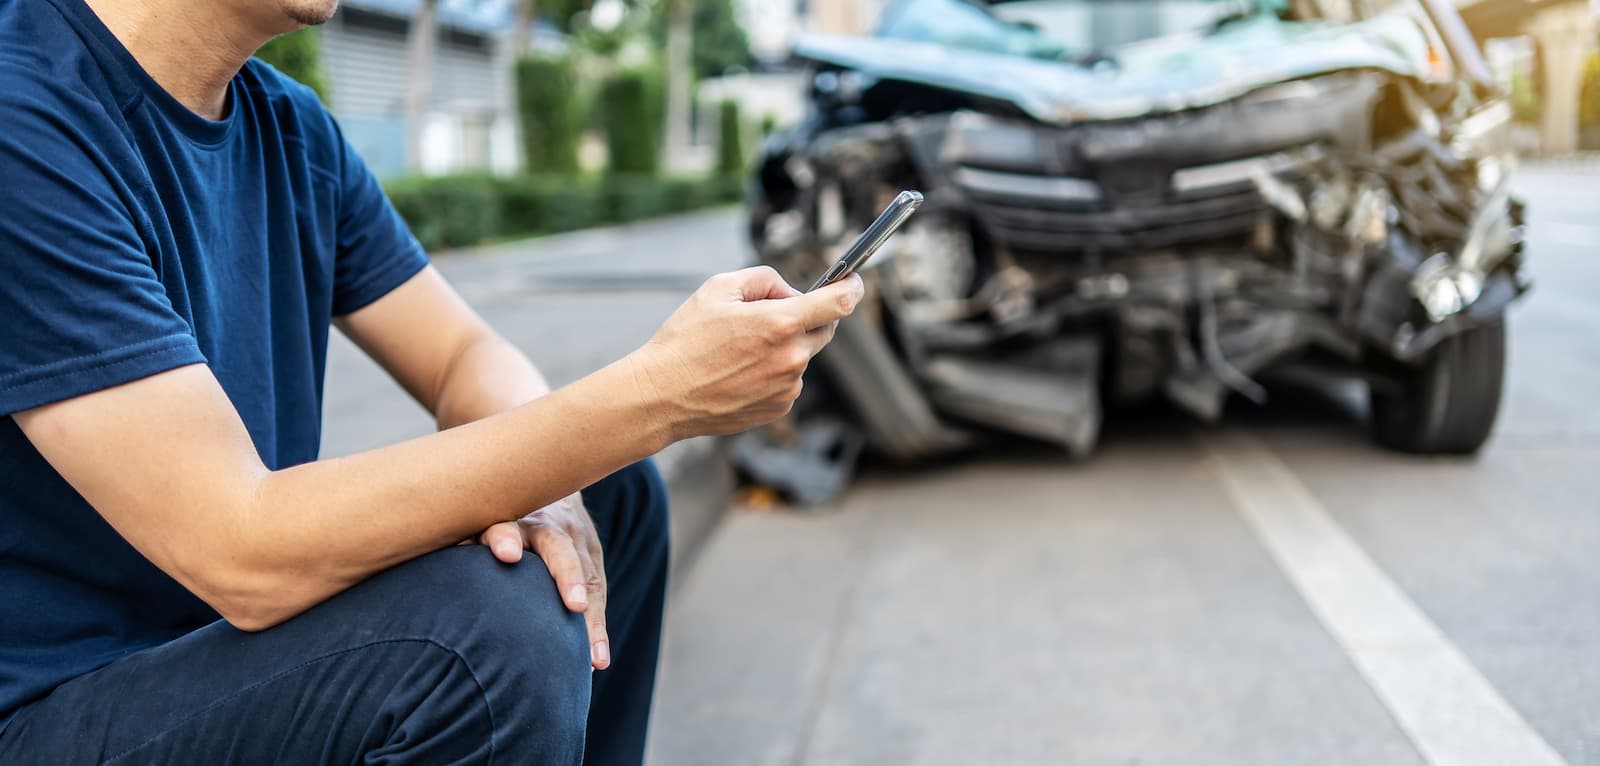 Distracted Driving causes accidents